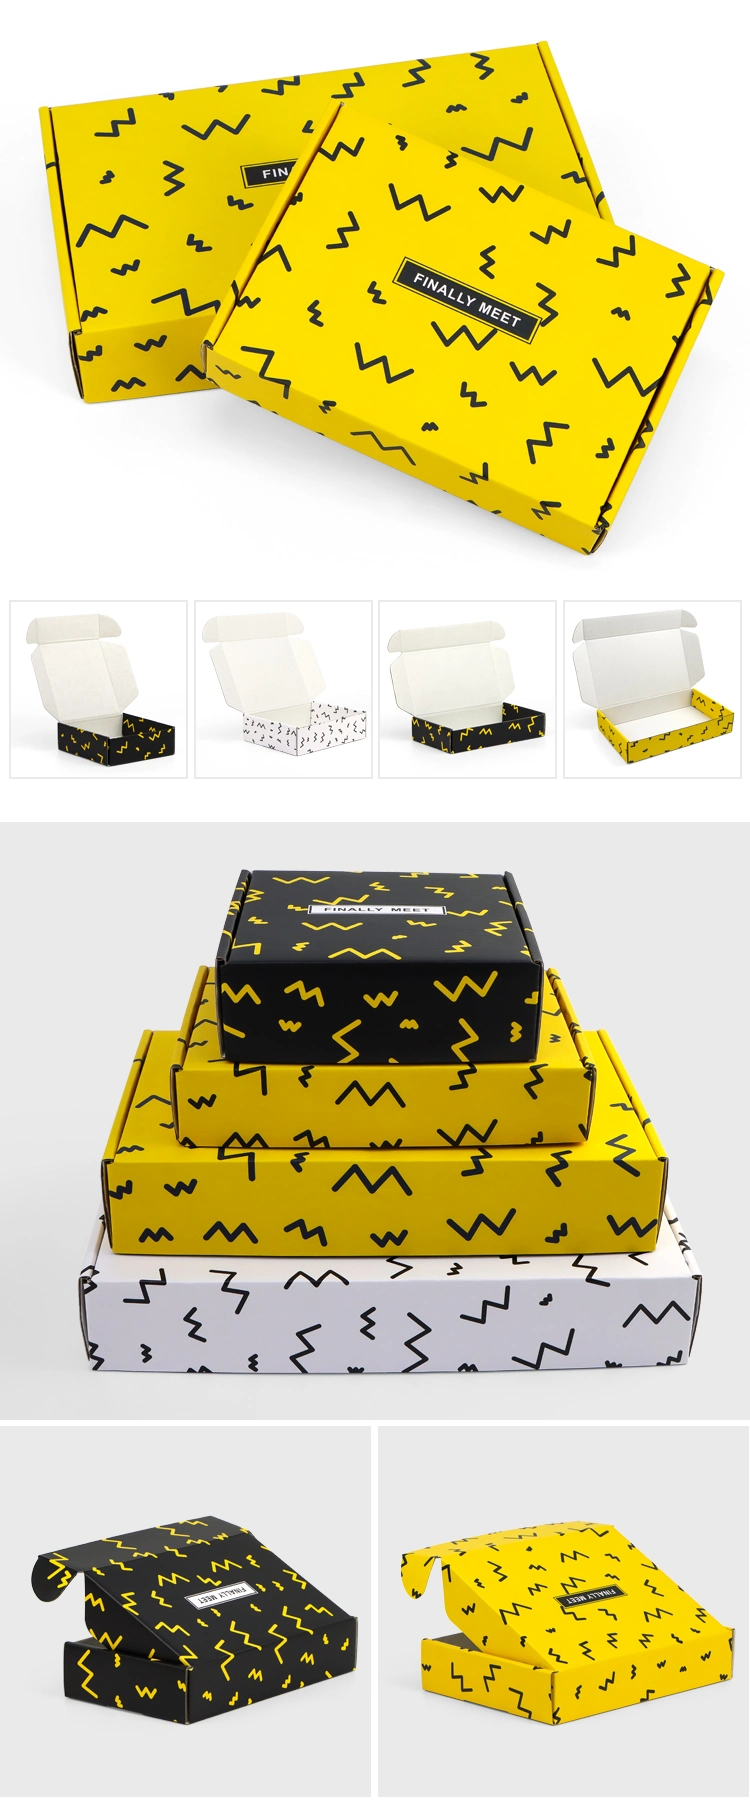 Firstsail Custom Design Cheap Durable Apparel Clothing Cardboard Paper Box Mailing Socks Clothes Shipping Yellow Color Corrugated Boxes